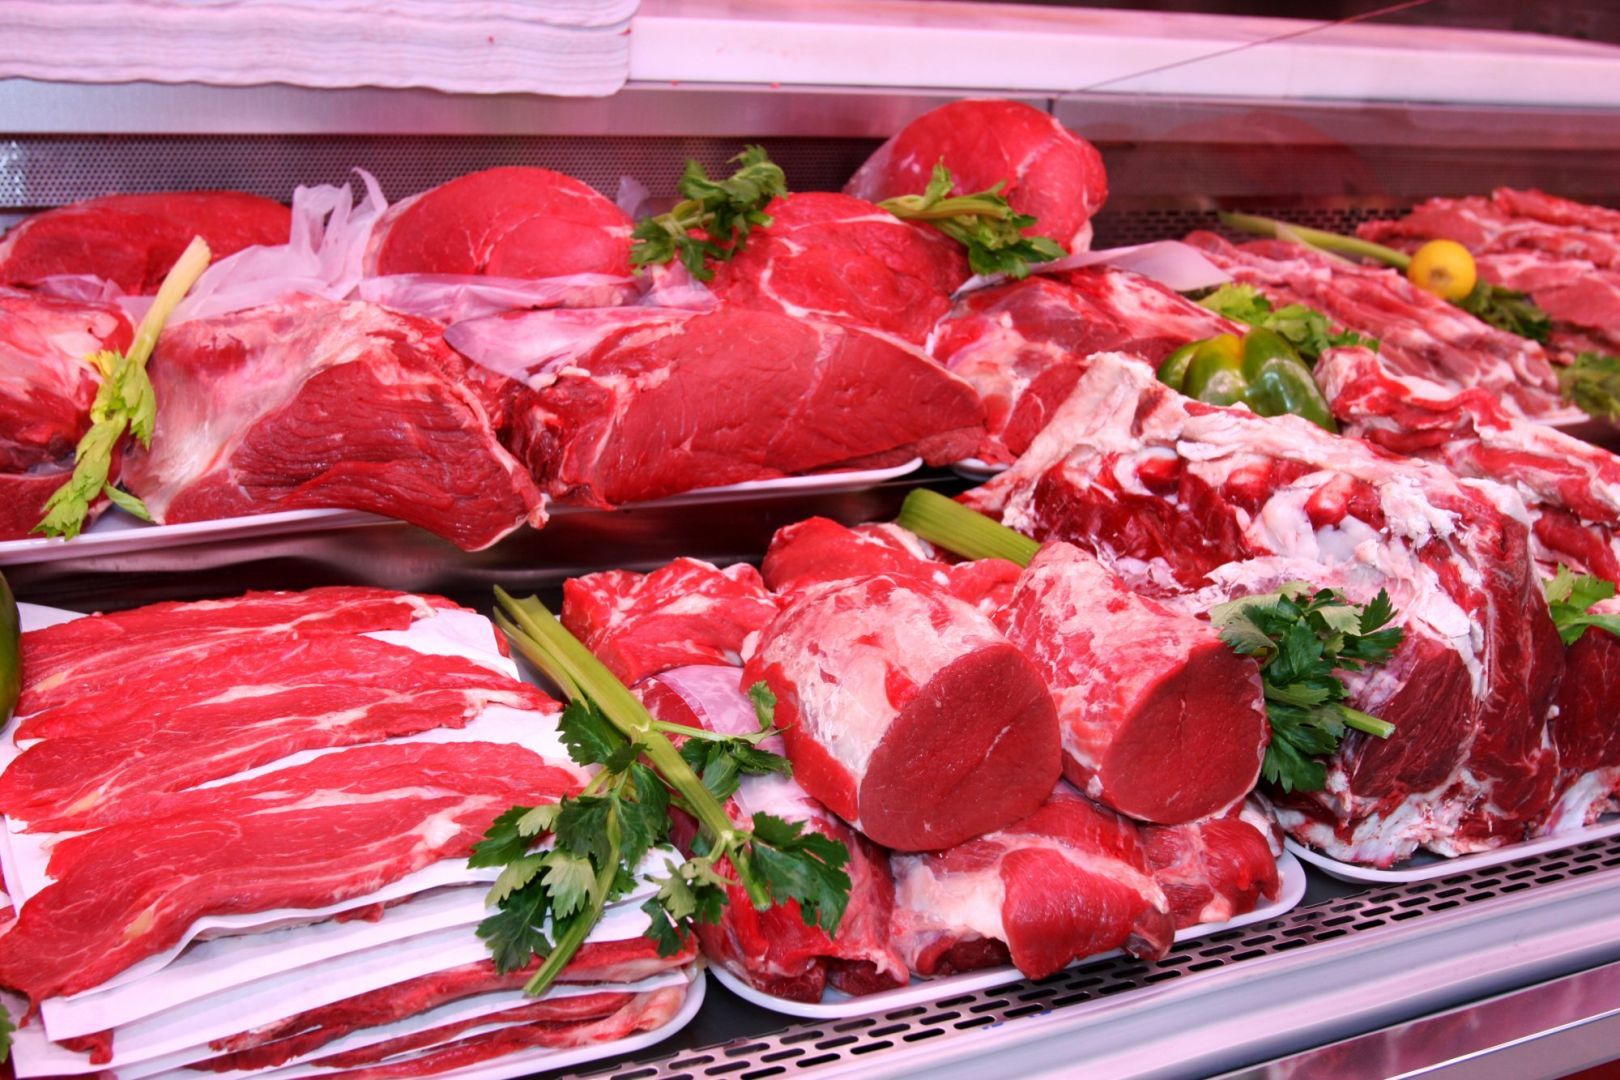 Azerbaijan increased meat imports by more than 3 per cent over the year